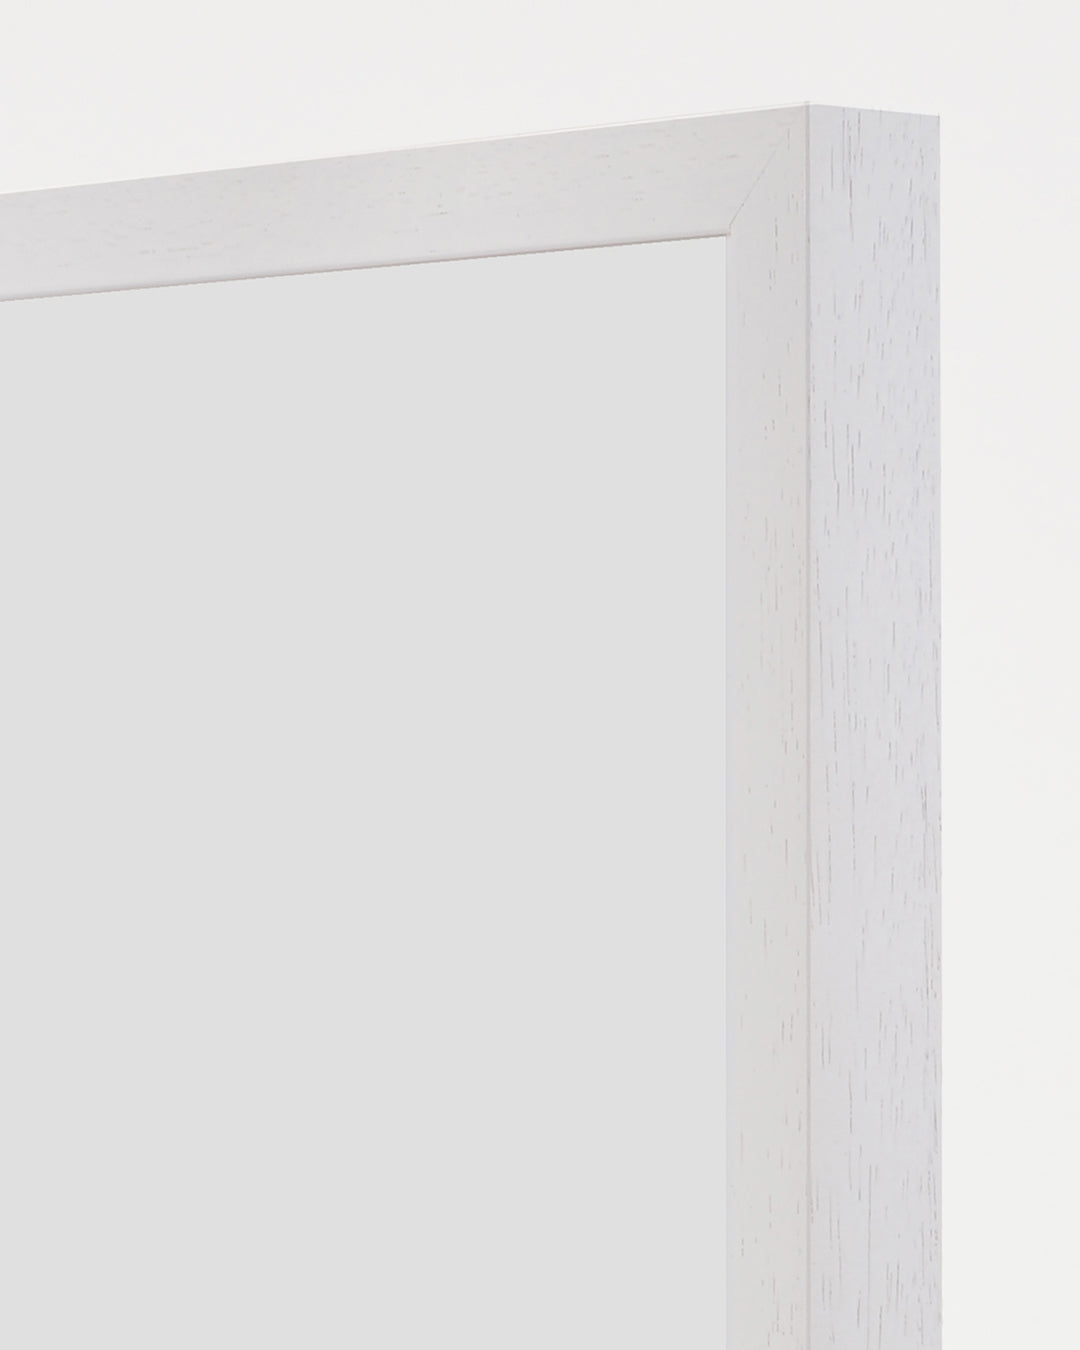 White Picture Frame (Wood Grain), A4 Size Photo Frame